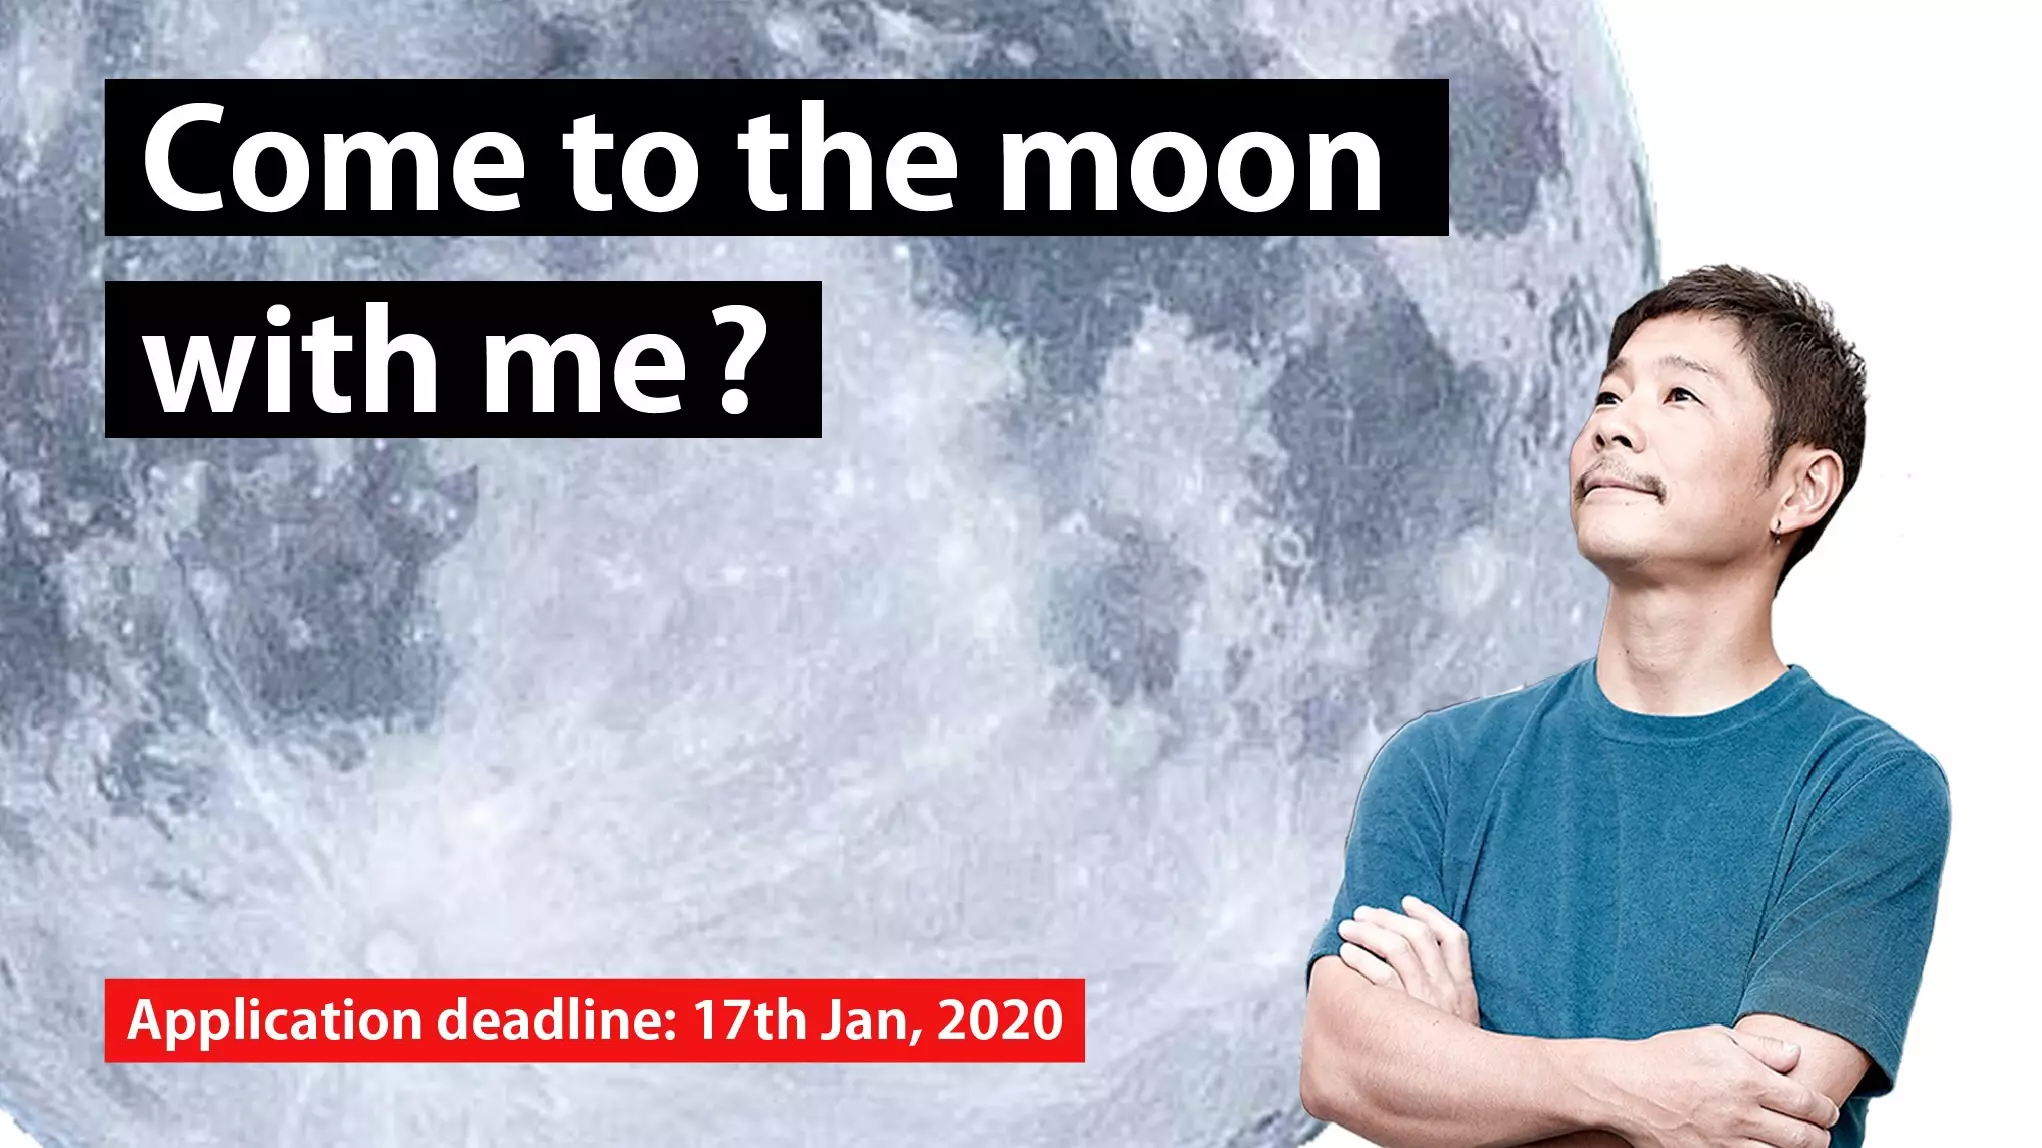 Yusaku Maezawa Is Looking For A 'Life Partner' To Take To The Moon